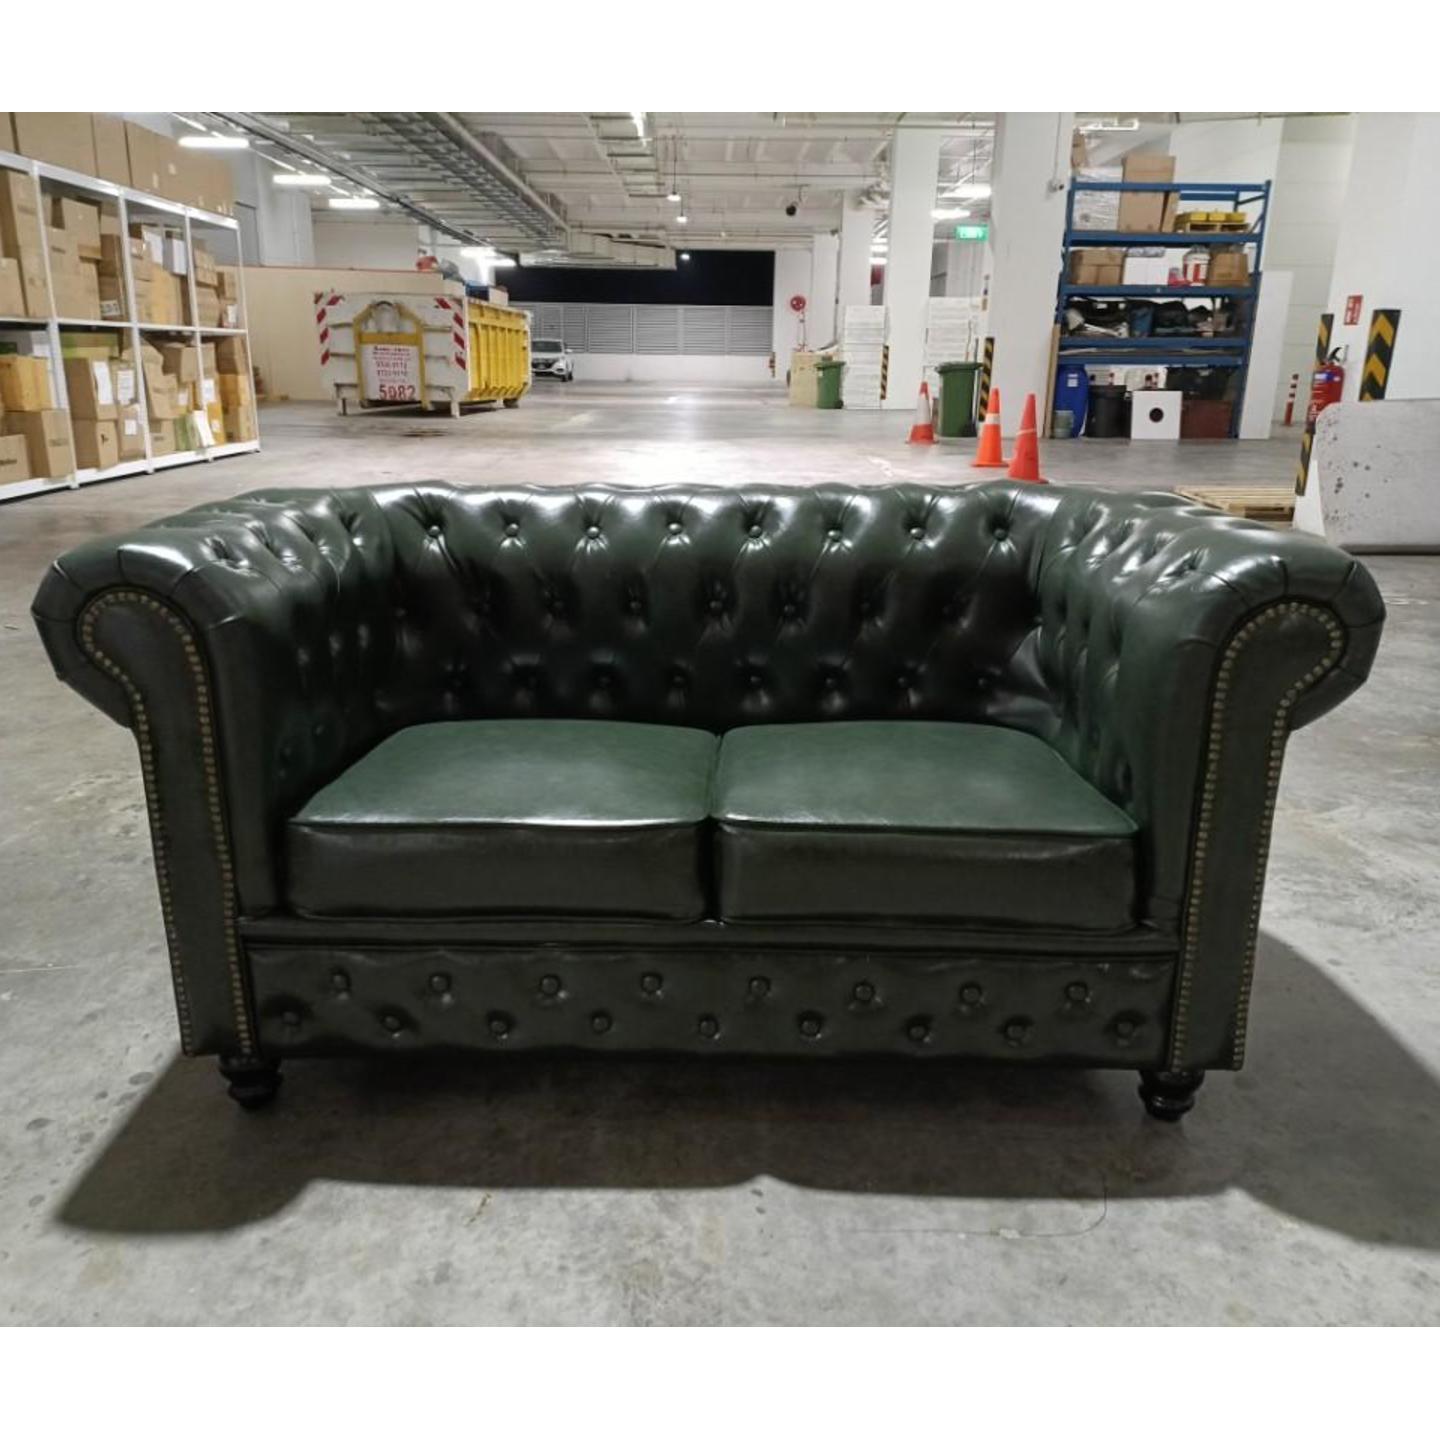 SALVADORE X 2 Seater Chesterfield Sofa in EMERALD GREEN